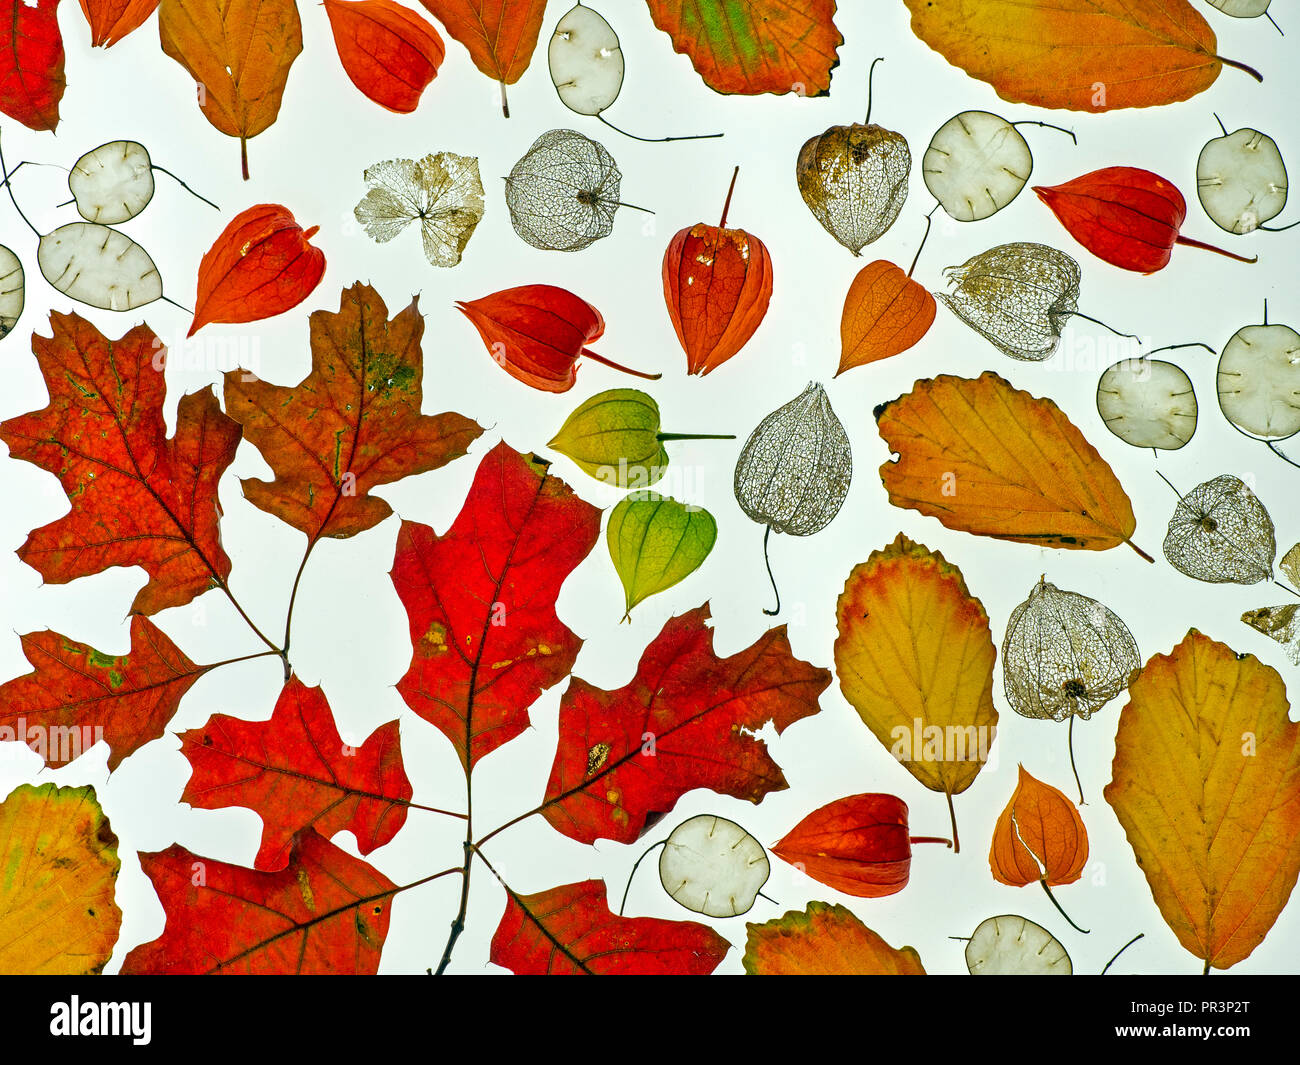 autumn garden layout with autumn leaves honesty seeds and chinese lanterns Stock Photo